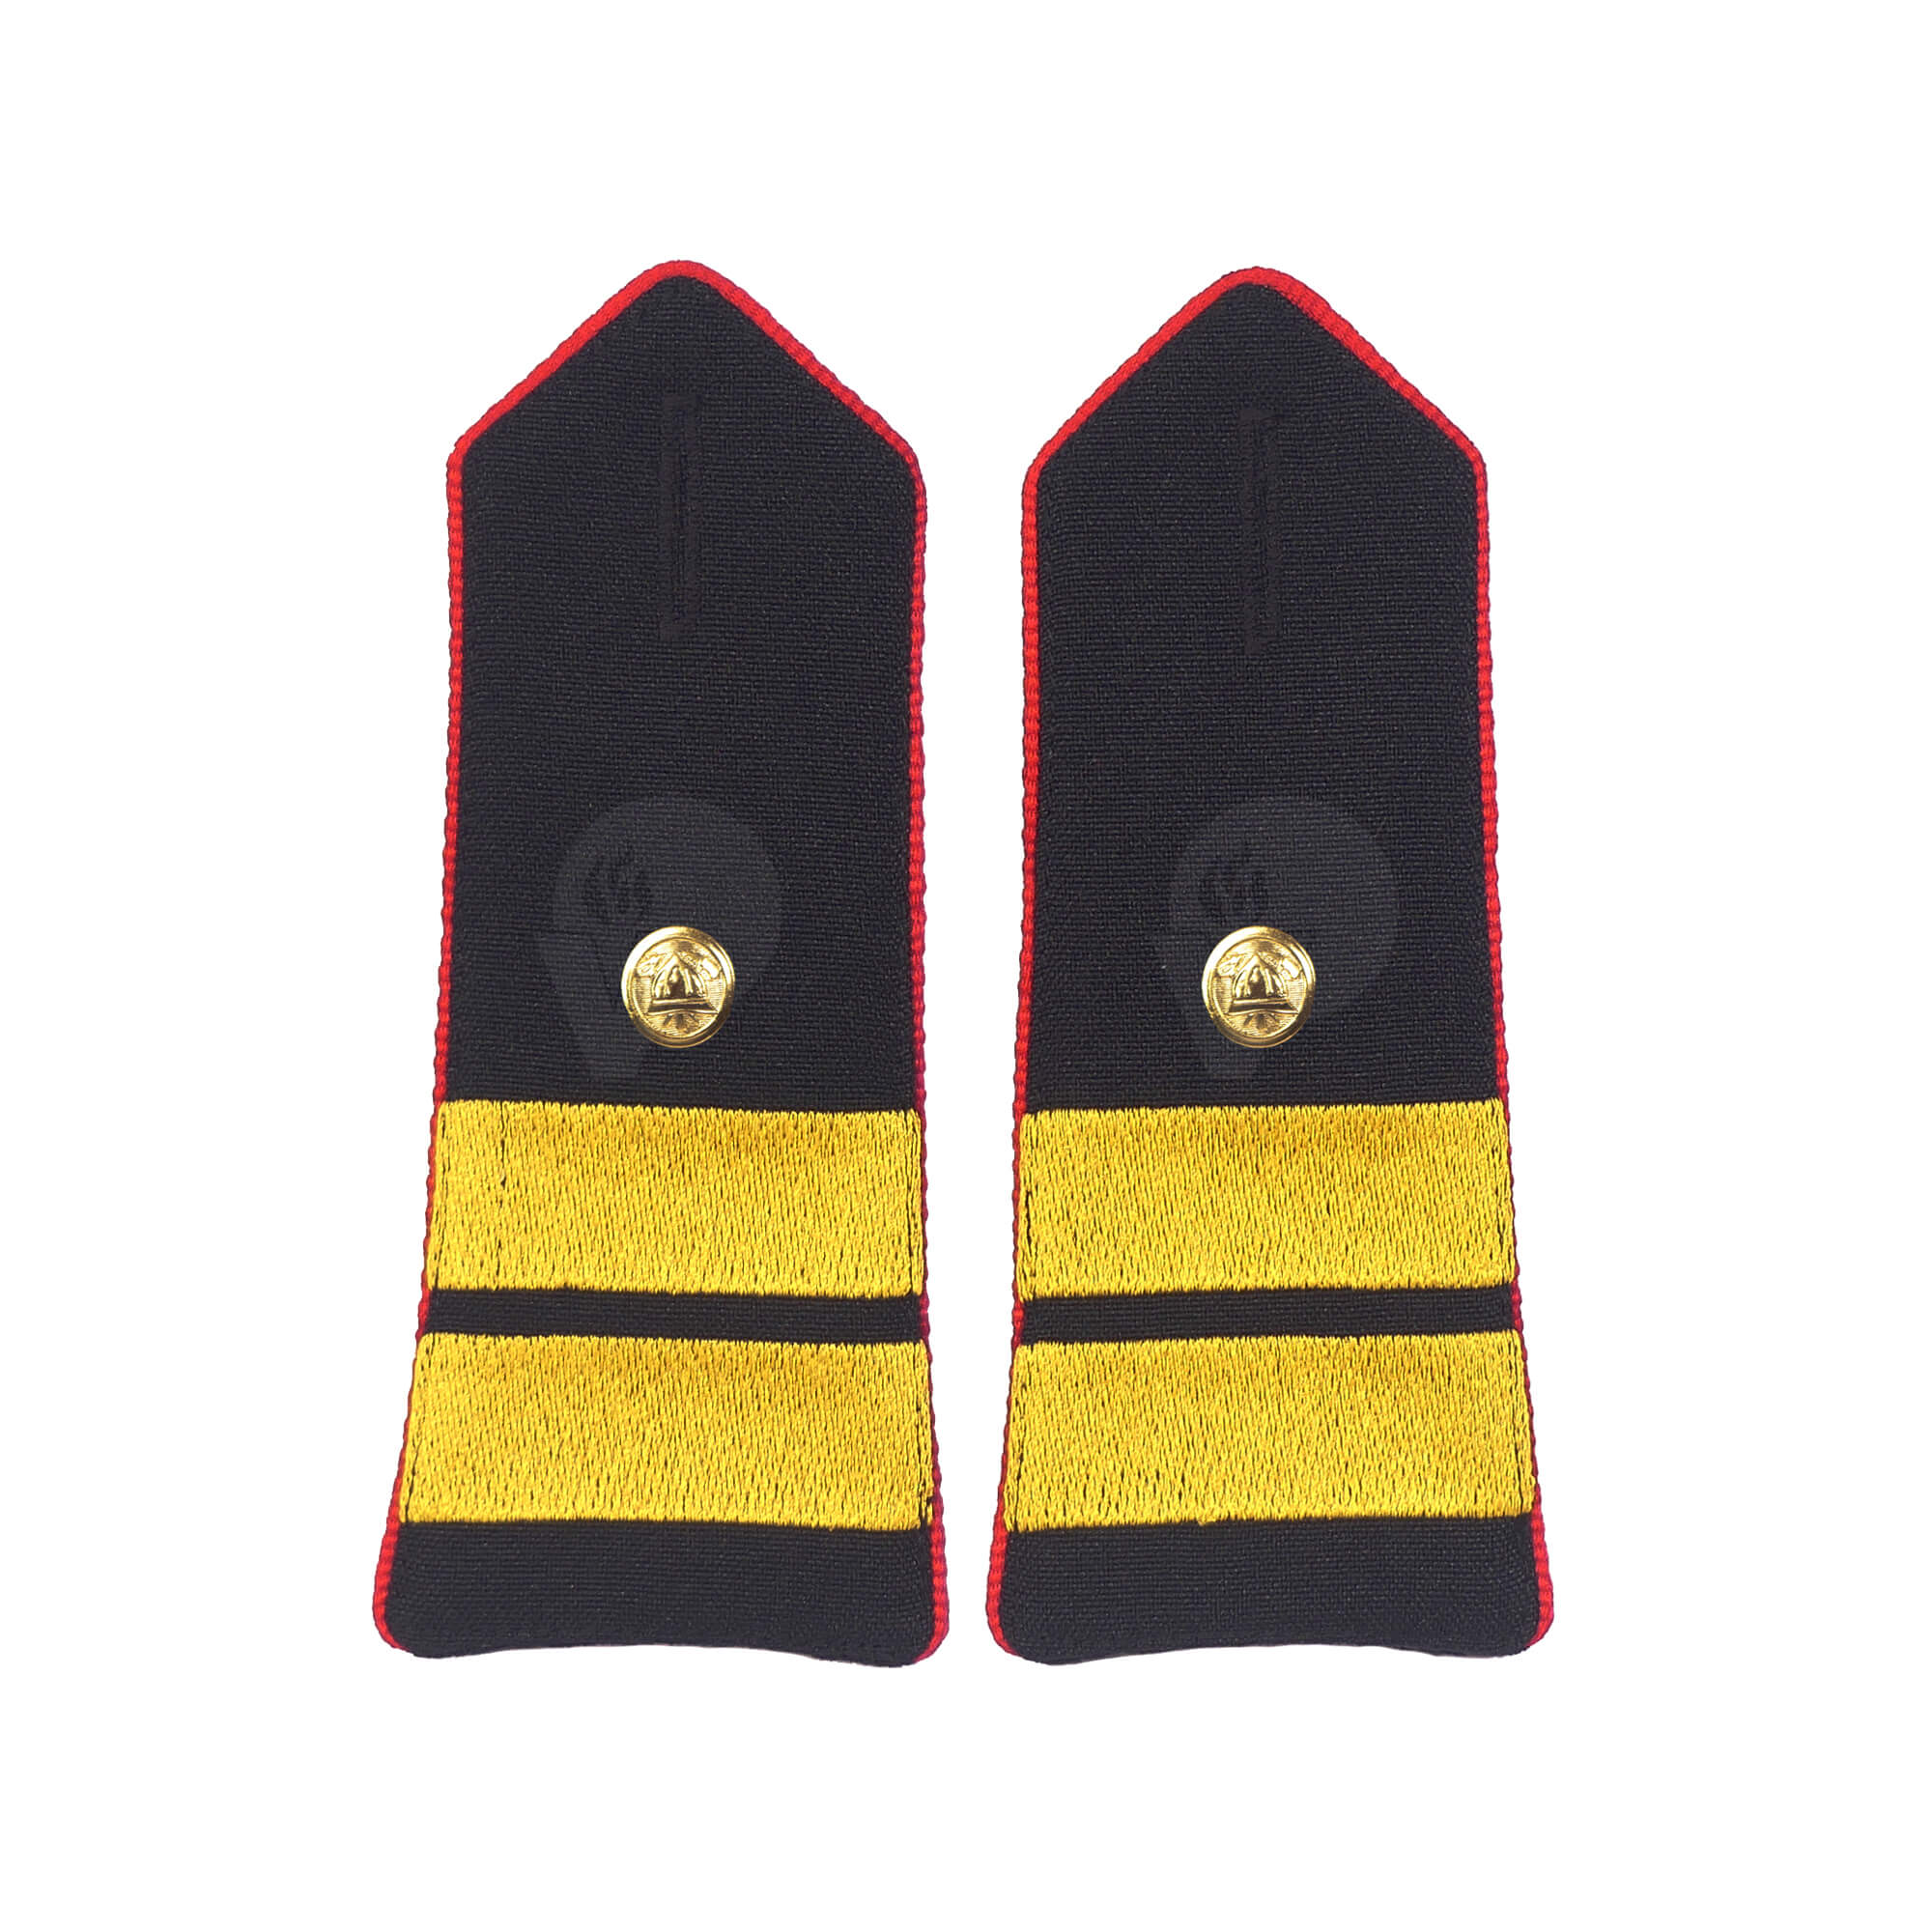 Rank Marks for Professional Firefighters, First Class Fire Officer